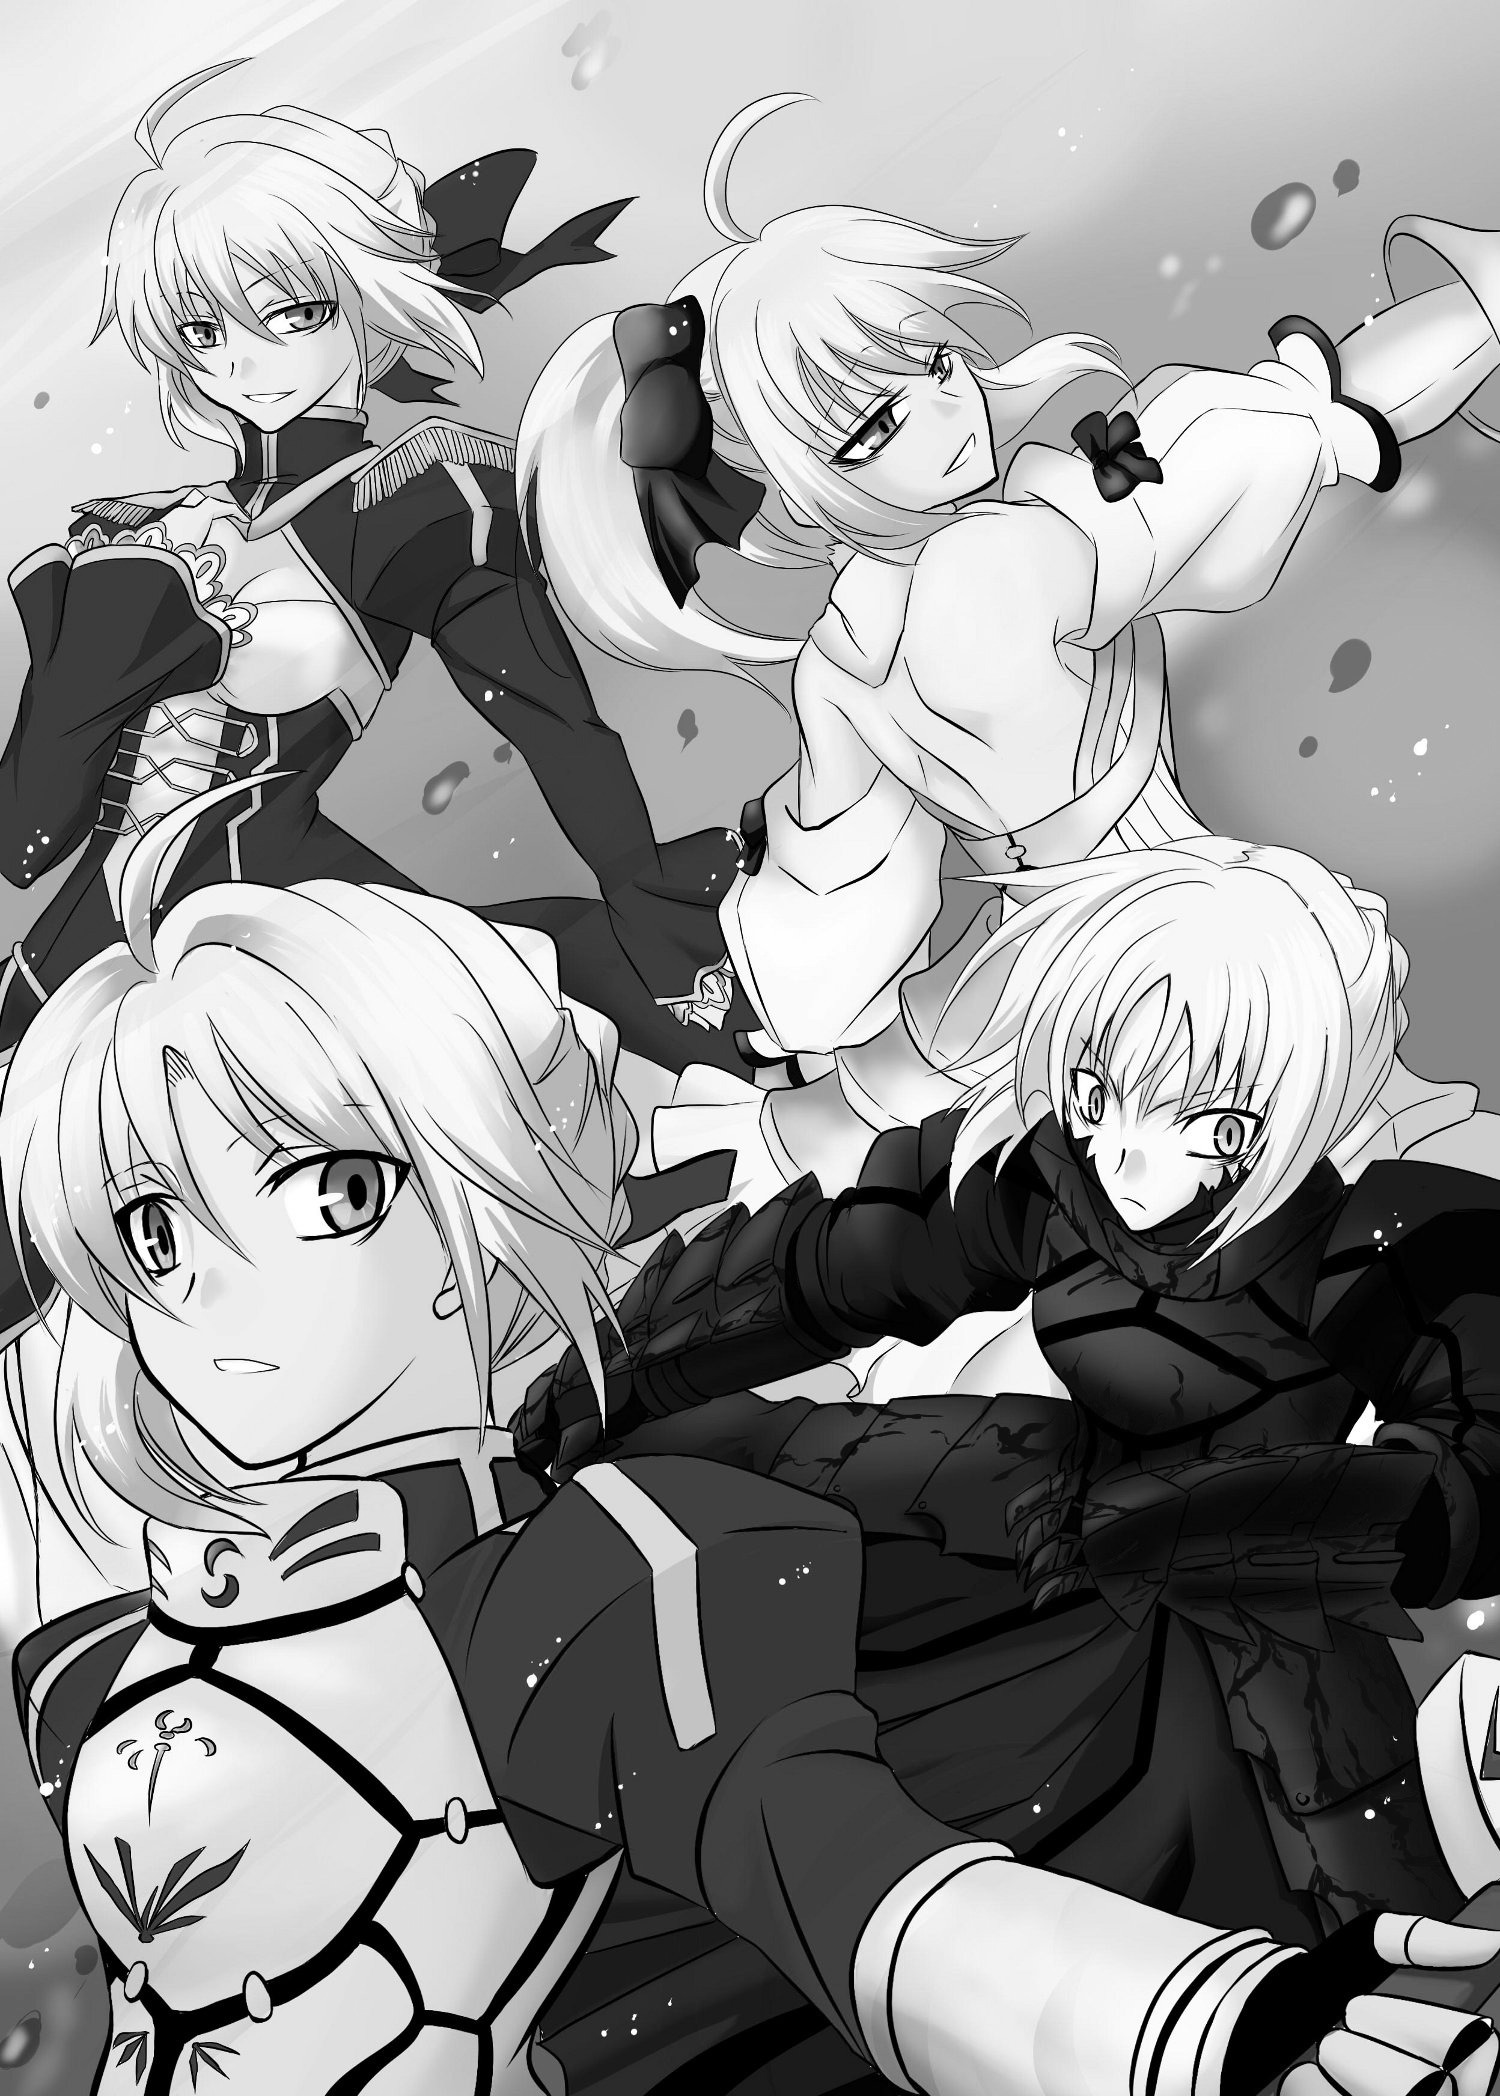 Anime 1500x2096 anime anime girls monochrome Fate series fate/stay night: heaven's feel Fate/Extra Fate/Extra CCC Fate/Unlimited Codes  Fate/Grand Order Artoria Pendragon Saber Saber Alter Saber Lily Nero Claudius blonde long hair artwork digital art fan art